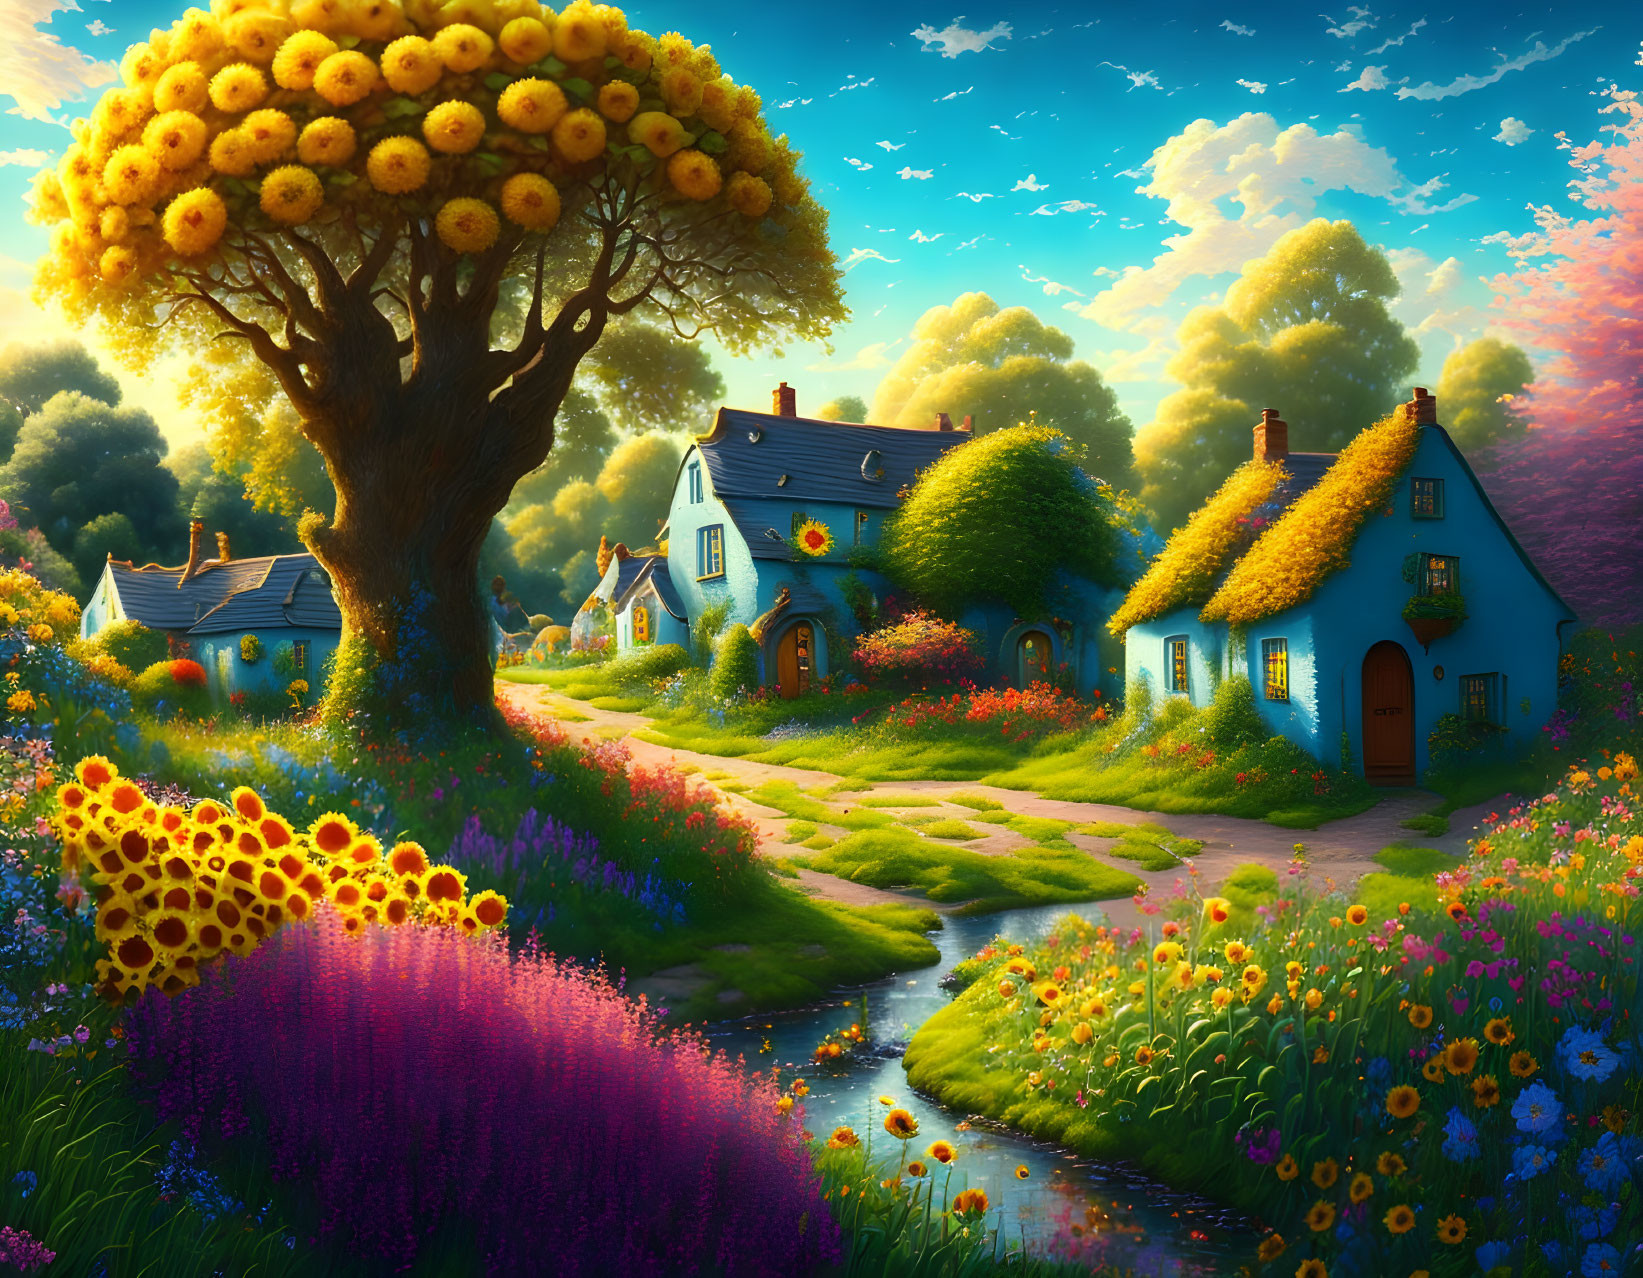 Colorful illustration of whimsical village with cottages, gardens, cobblestone path, and sunset